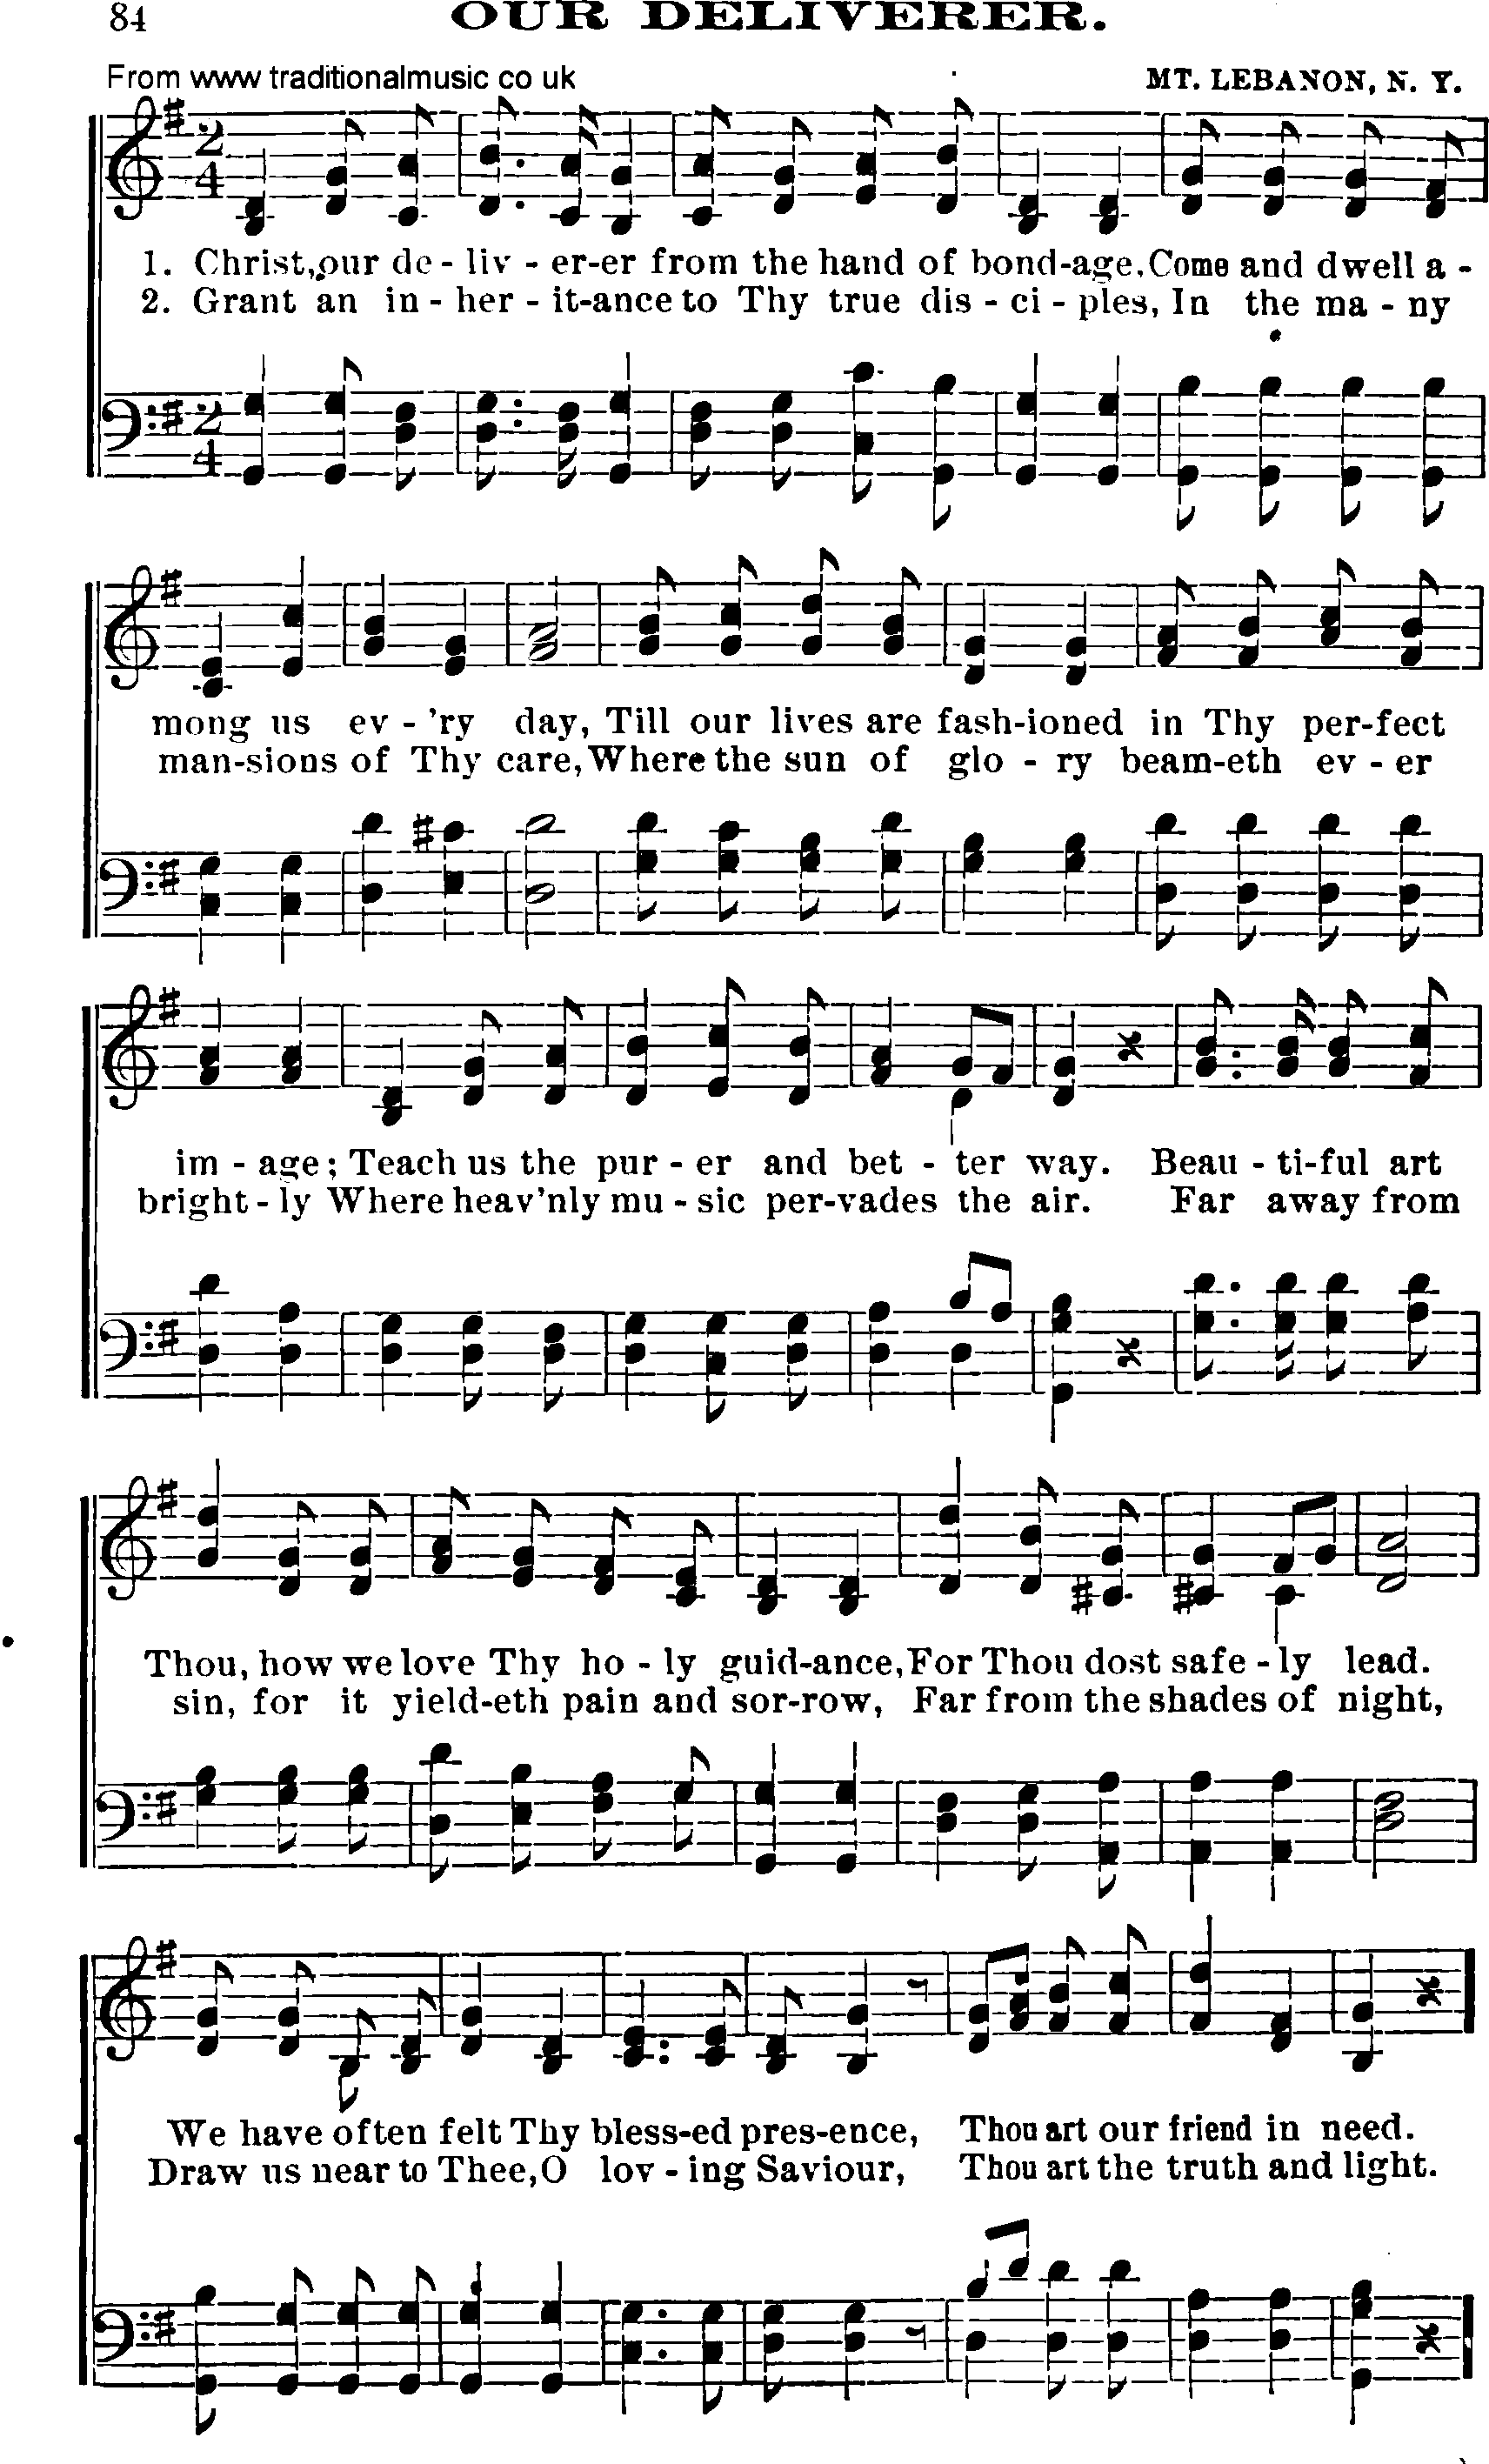 Shaker Music collection, Hymn: our deliverer, sheetmusic and PDF